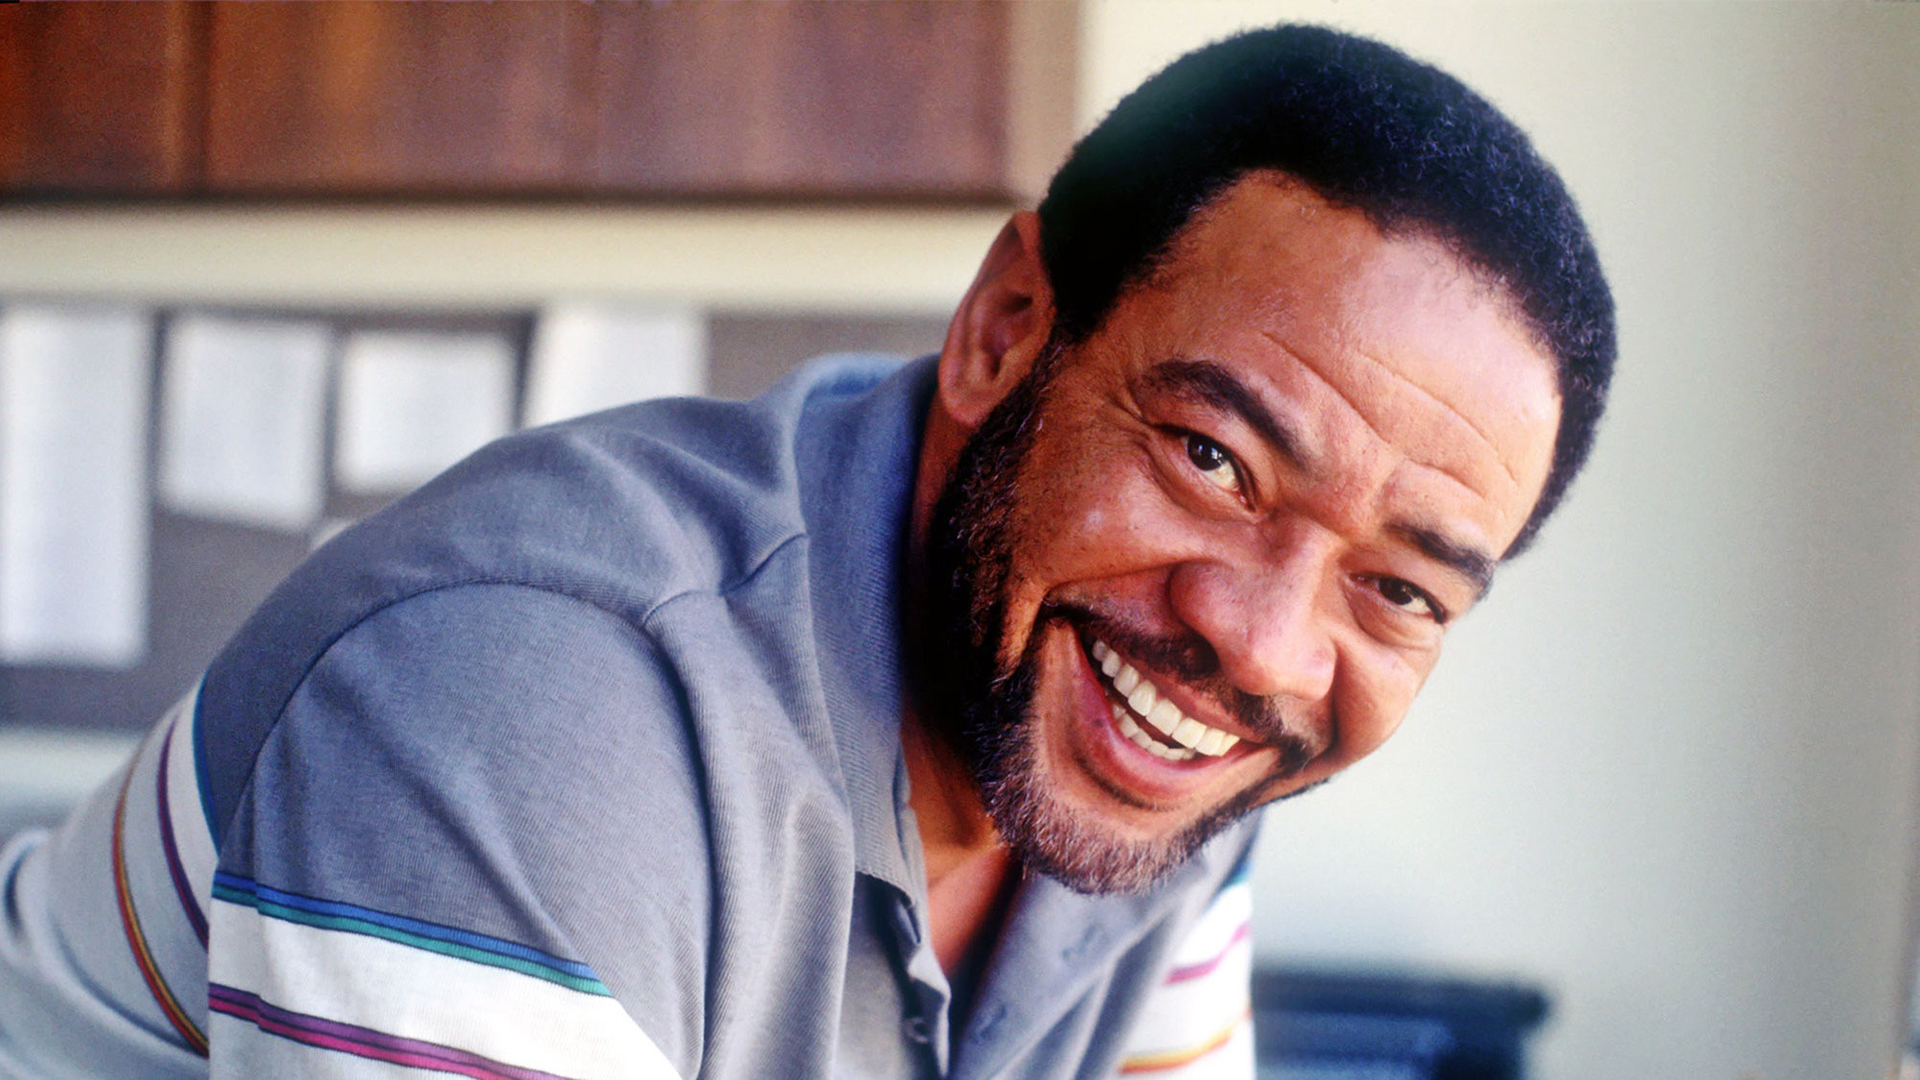 Singer/songwriter Bill Withers